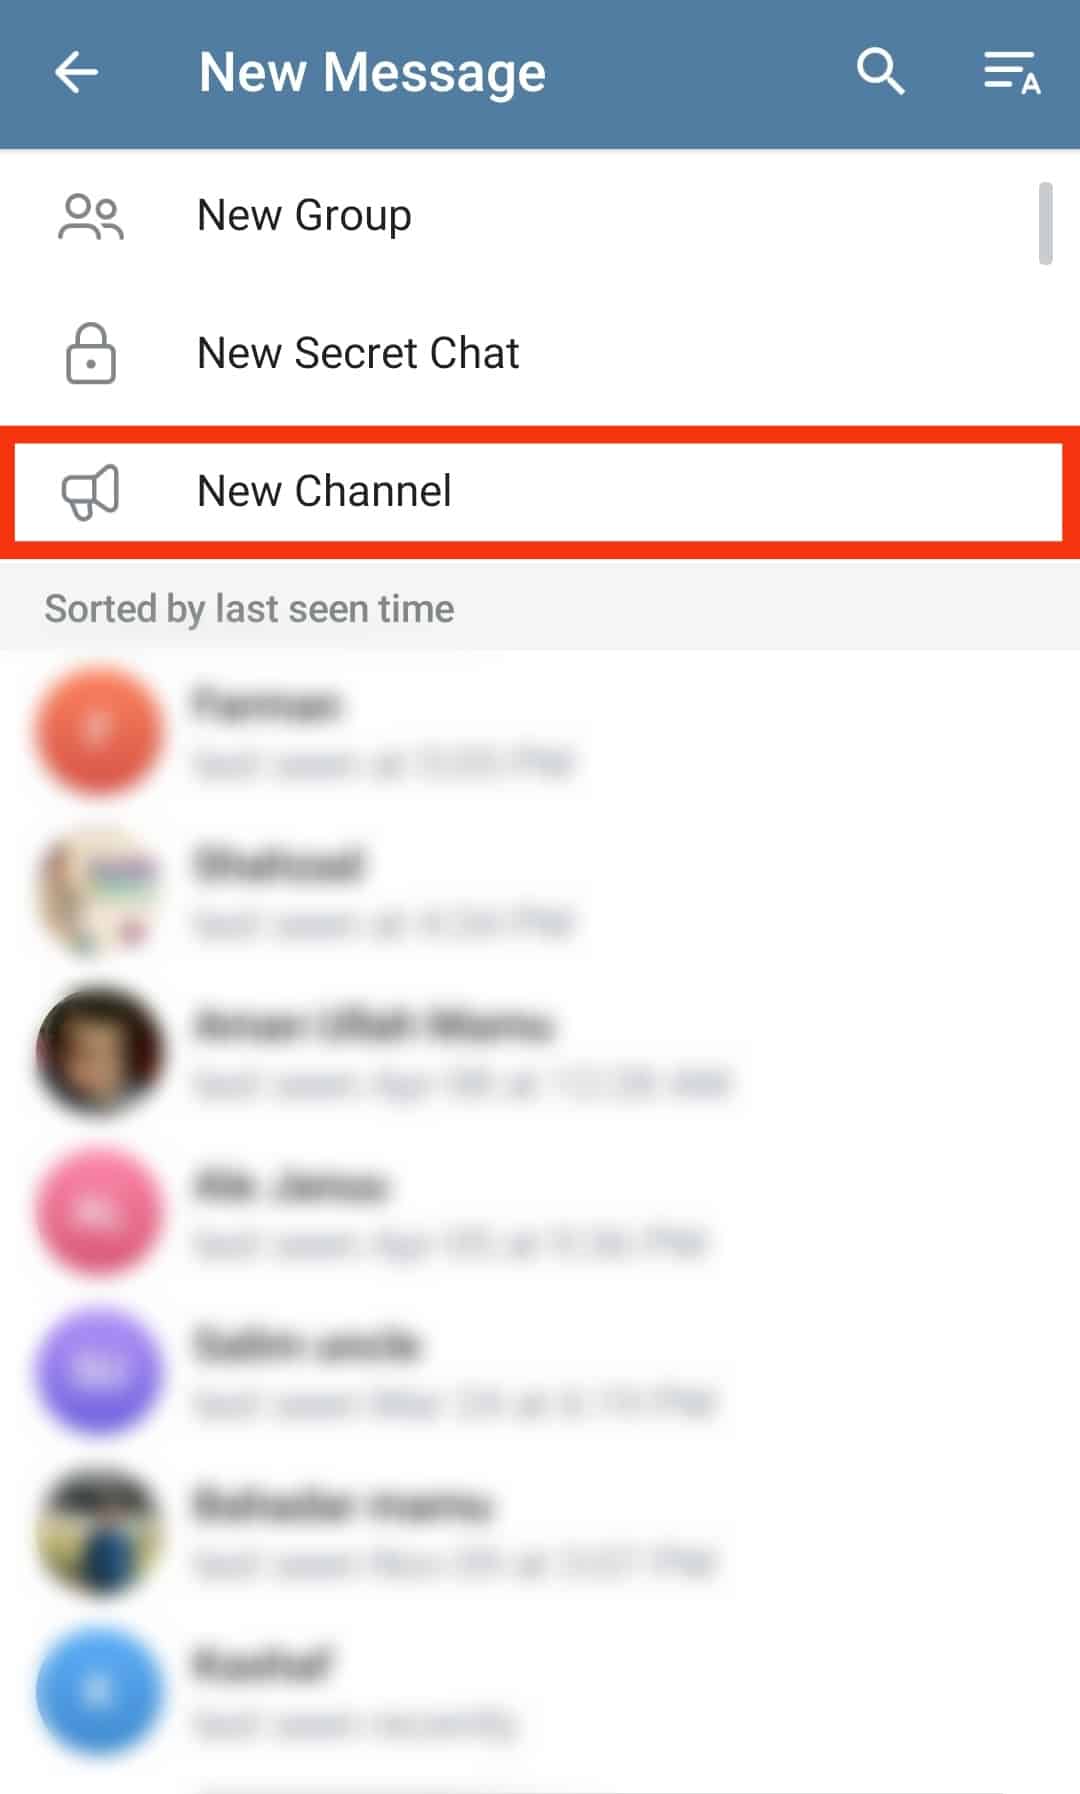 Click The New Channel Option